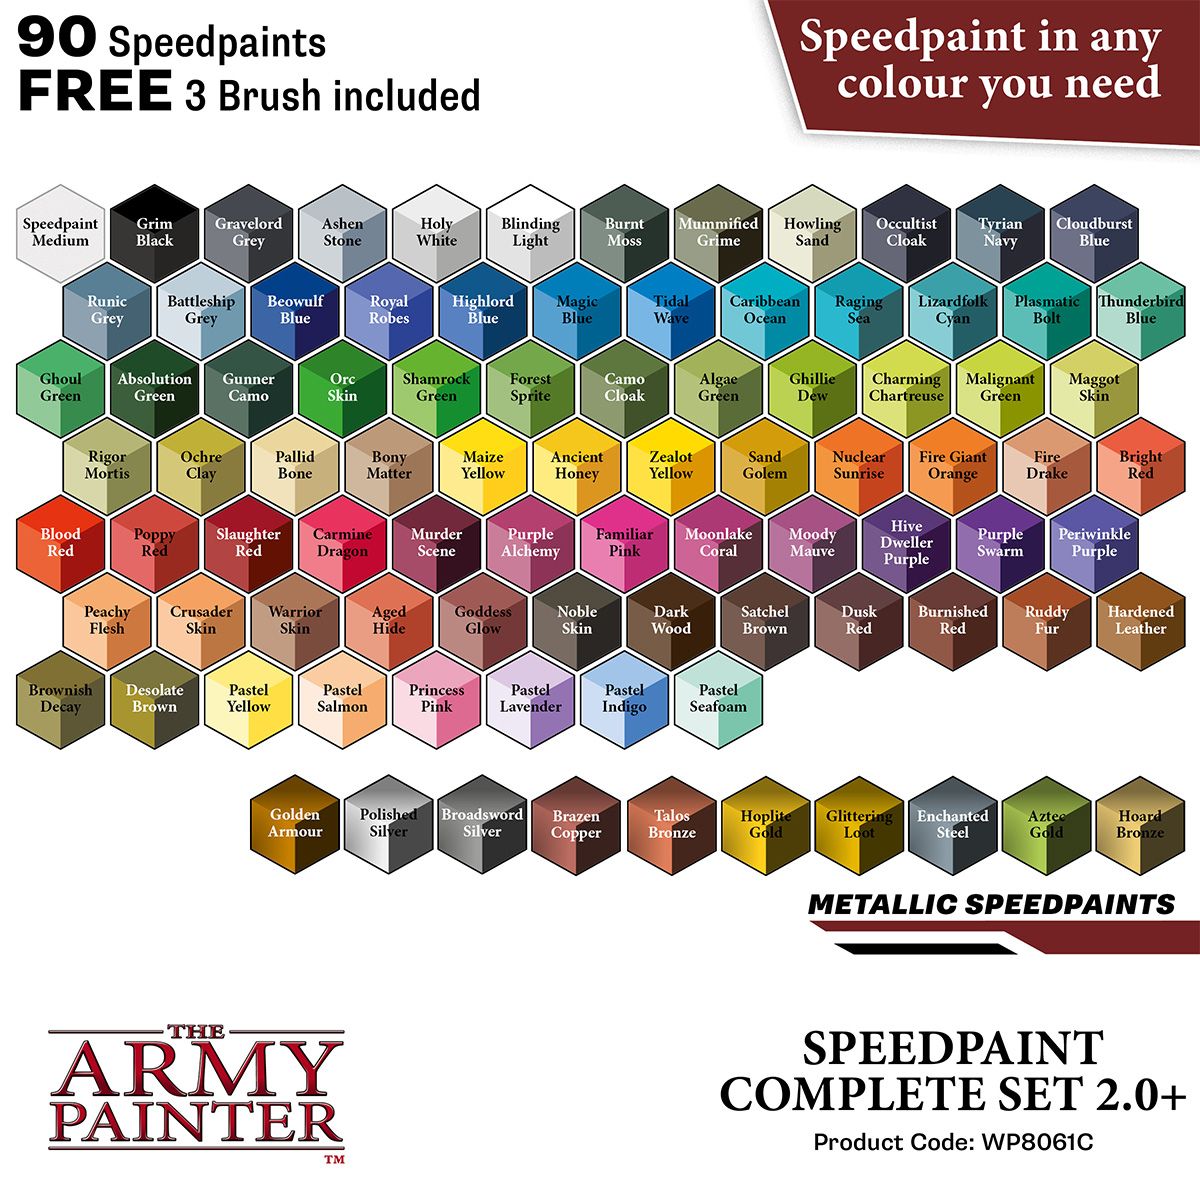 Army Painter® Speed Paint 2.0 Burnished Red - WP2083